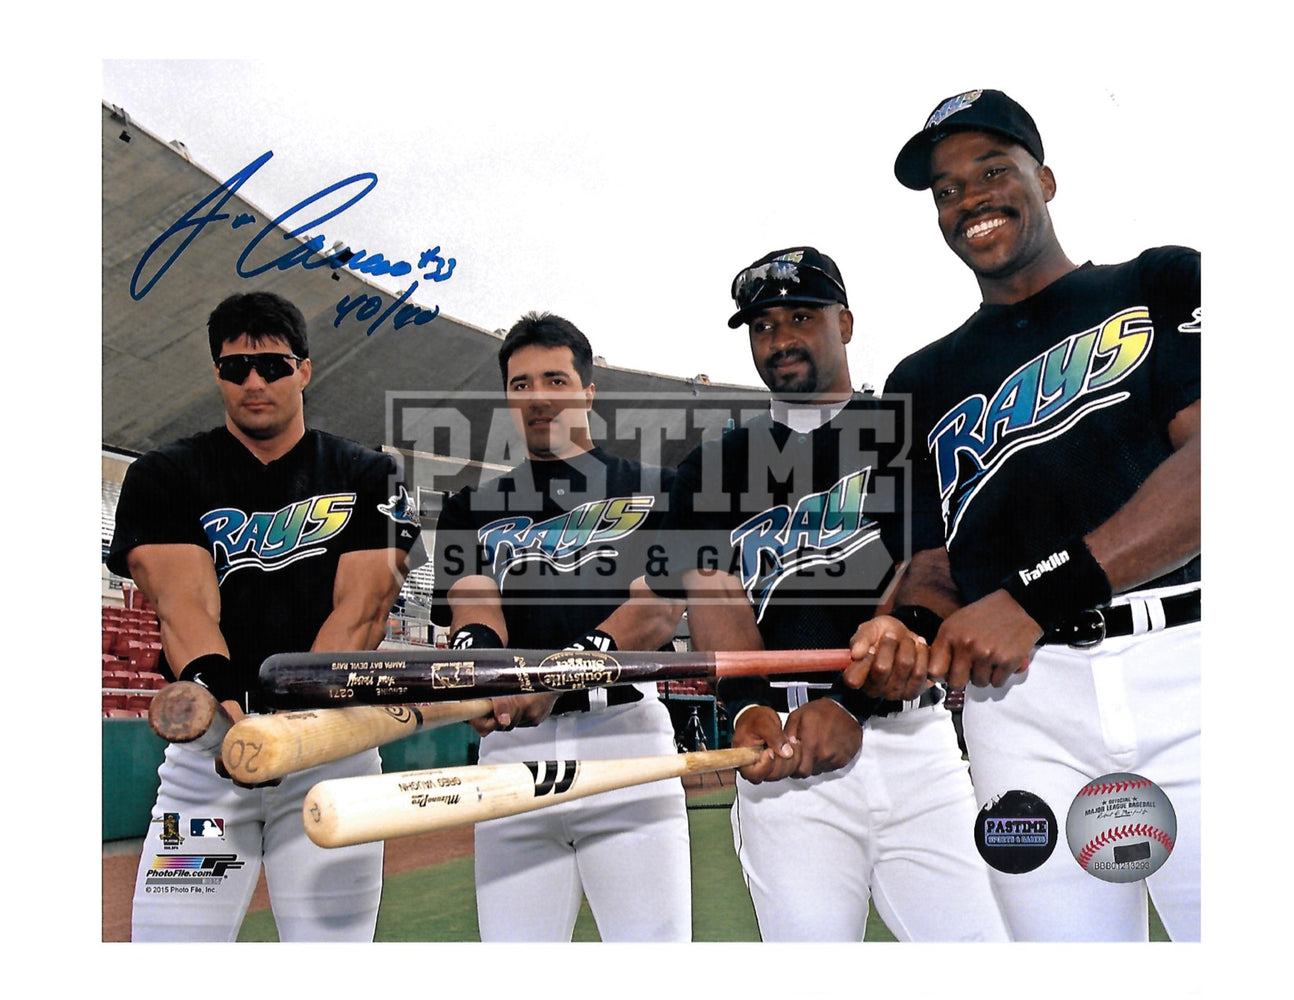 Jose Canseco Autographed 8X10 Tampa Bay Rays (With Team Mates) - Pastime Sports & Games